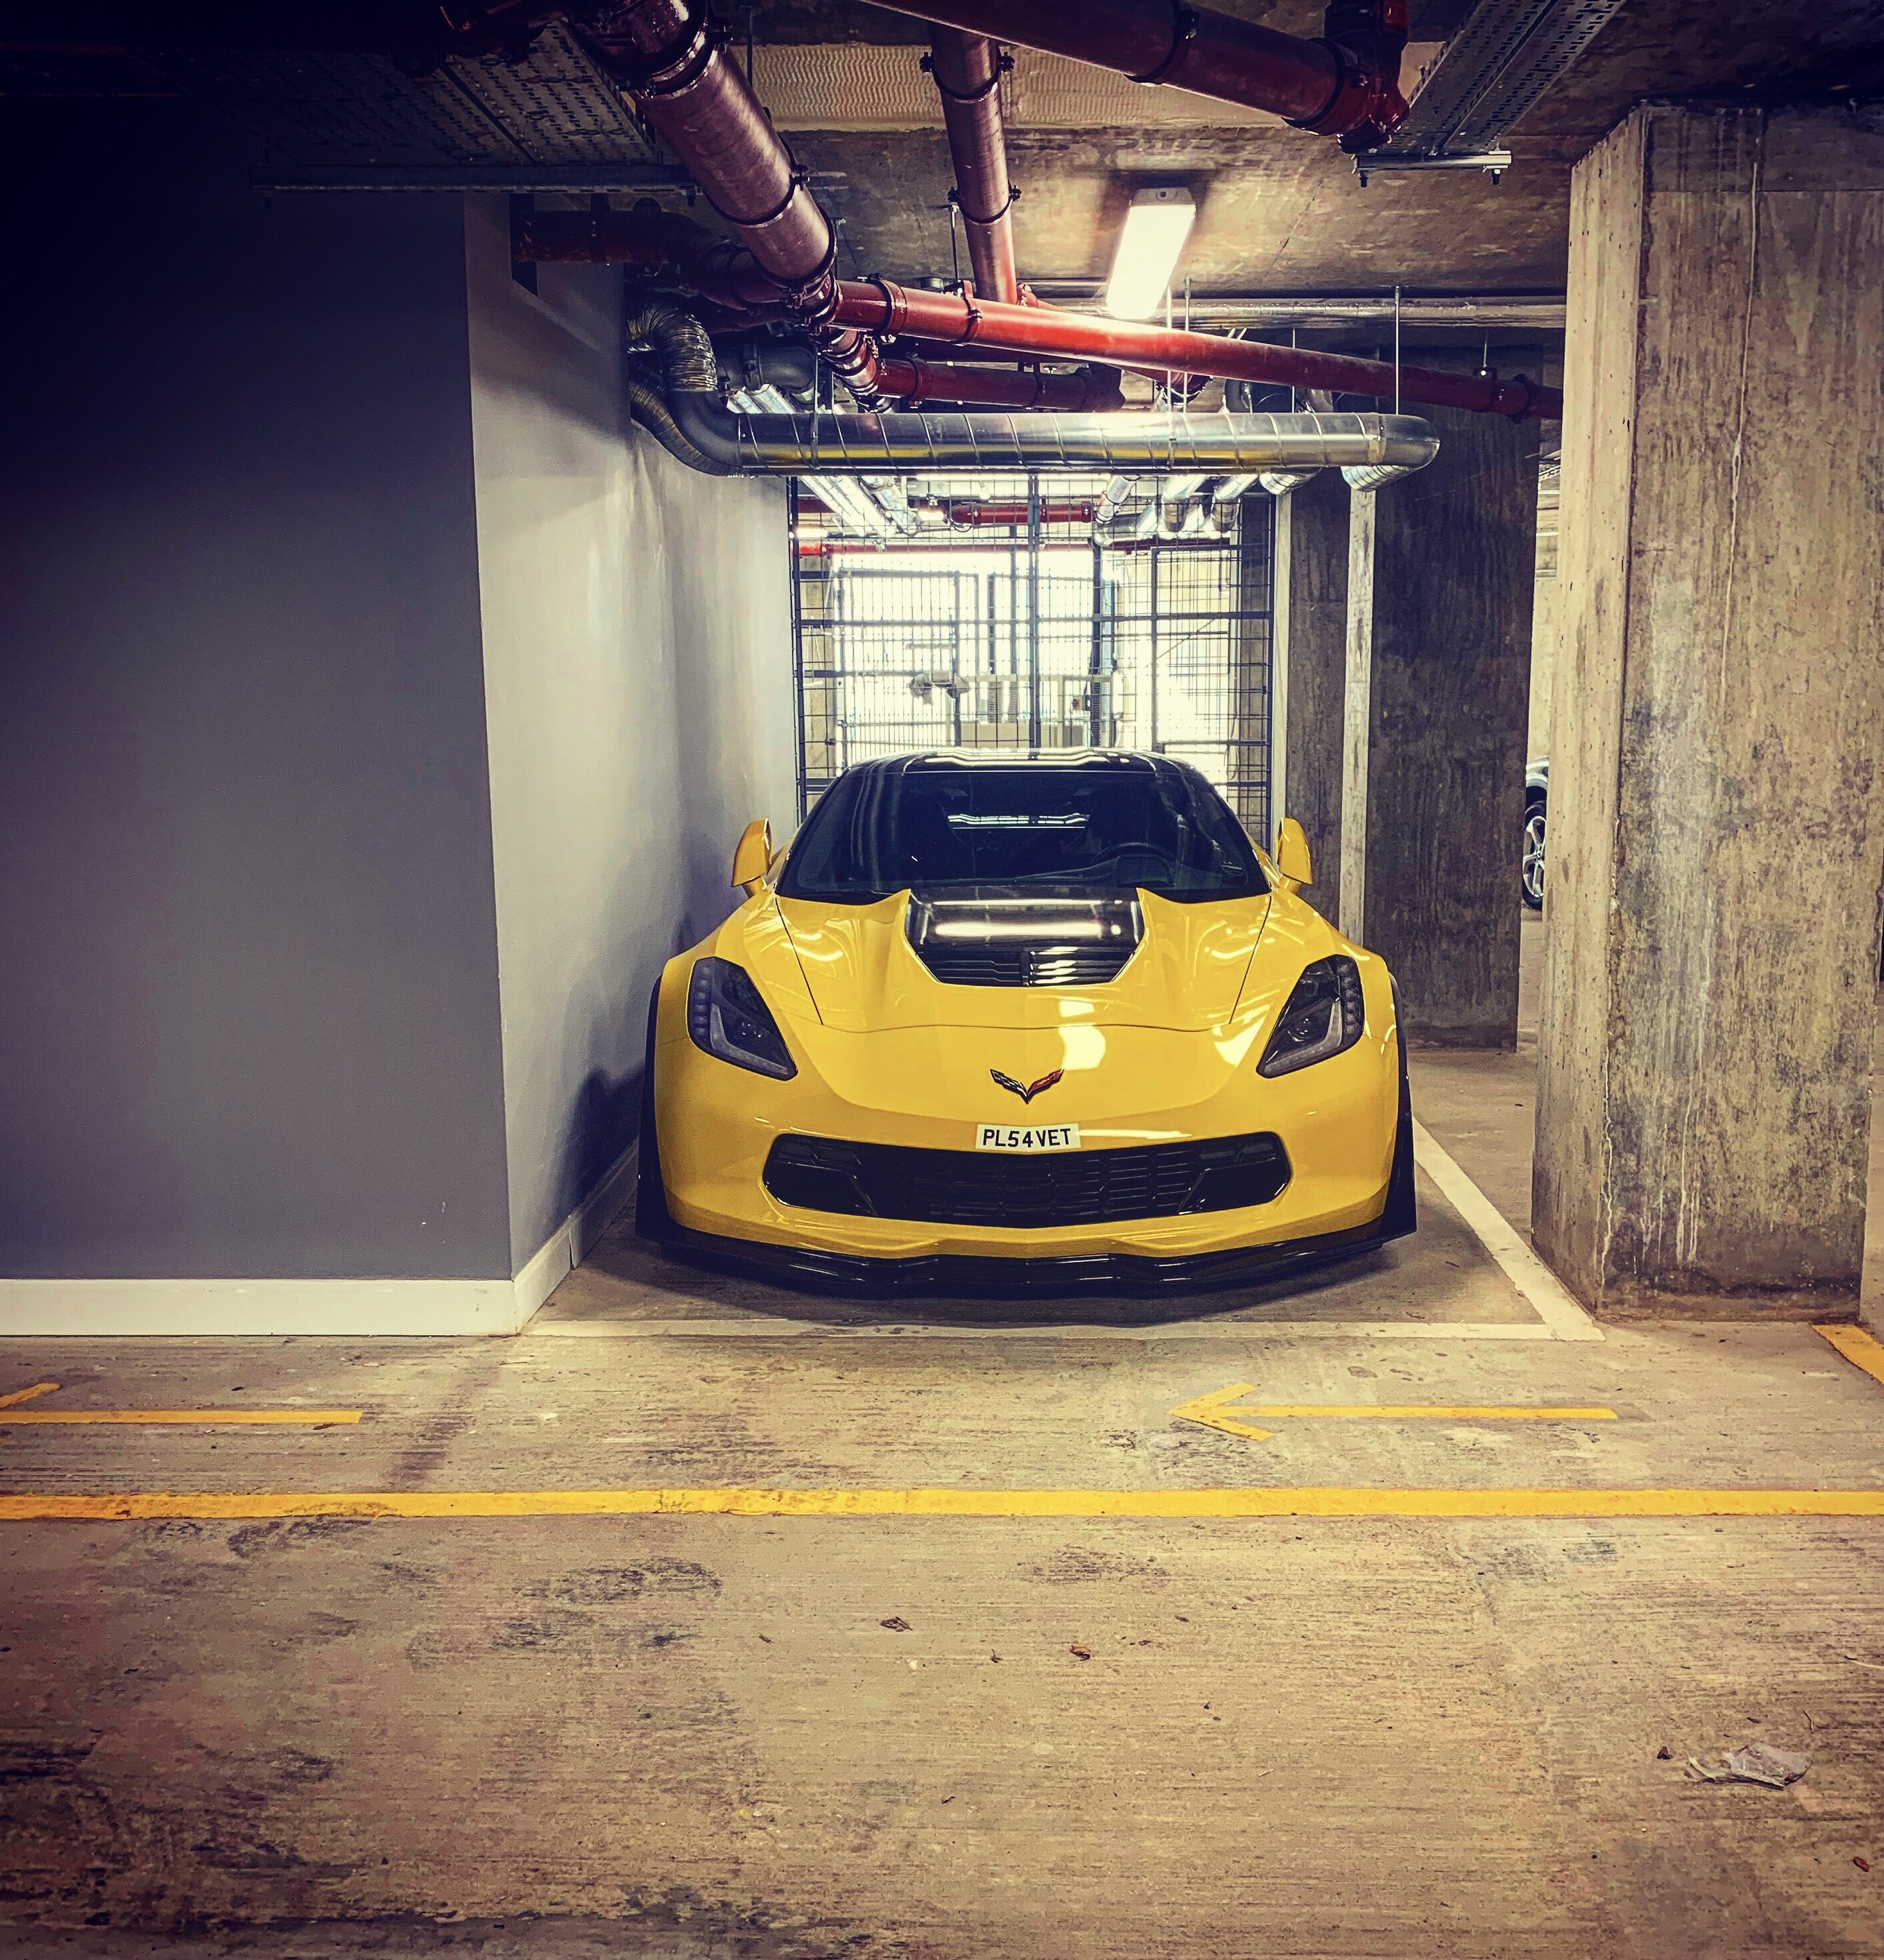 Pistonheads - The image shows a yellow Lamborghini car parked inside a garage. The car is positioned centrally in the frame, with its hood slightly open and its large air intake at the front. The interior of the garage features white walls and a concrete floor, while pipes can be seen running along the ceiling. On the right side of the image, there's a door to the outside world, which is partially visible. The car has a distinctive yellow color and is equipped with a large rear wing. The overall setting suggests that this garage might be a part of a private residence or a specialized storage facility for luxury vehicles.